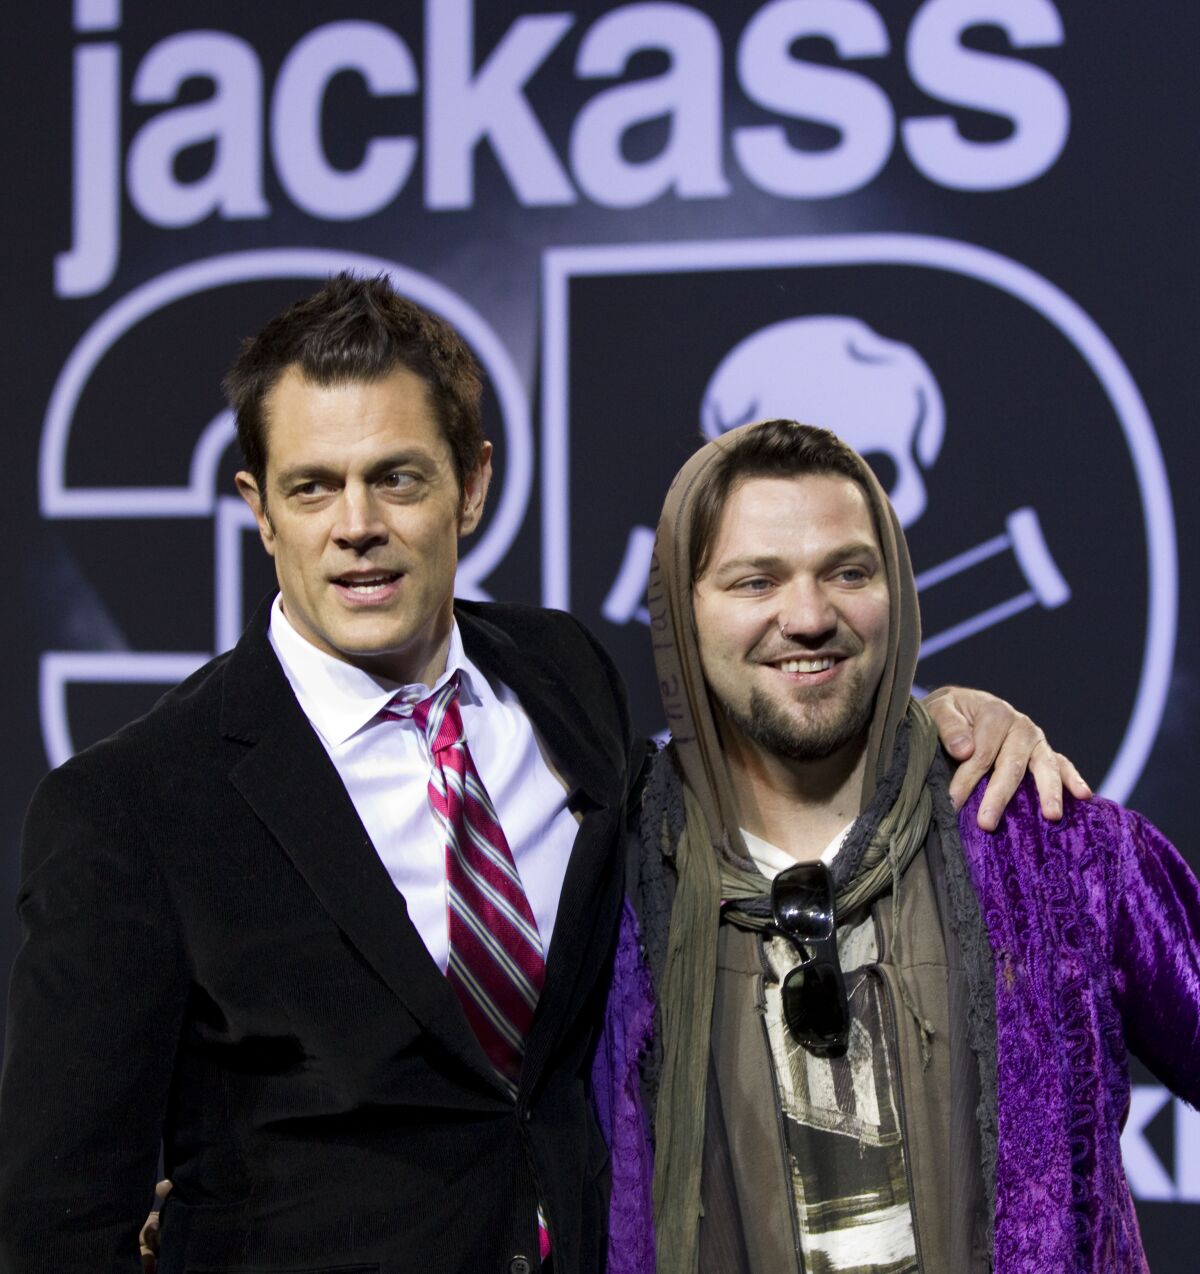 A man in a suit with his arm around a man in a hoodie at a movie premiere.